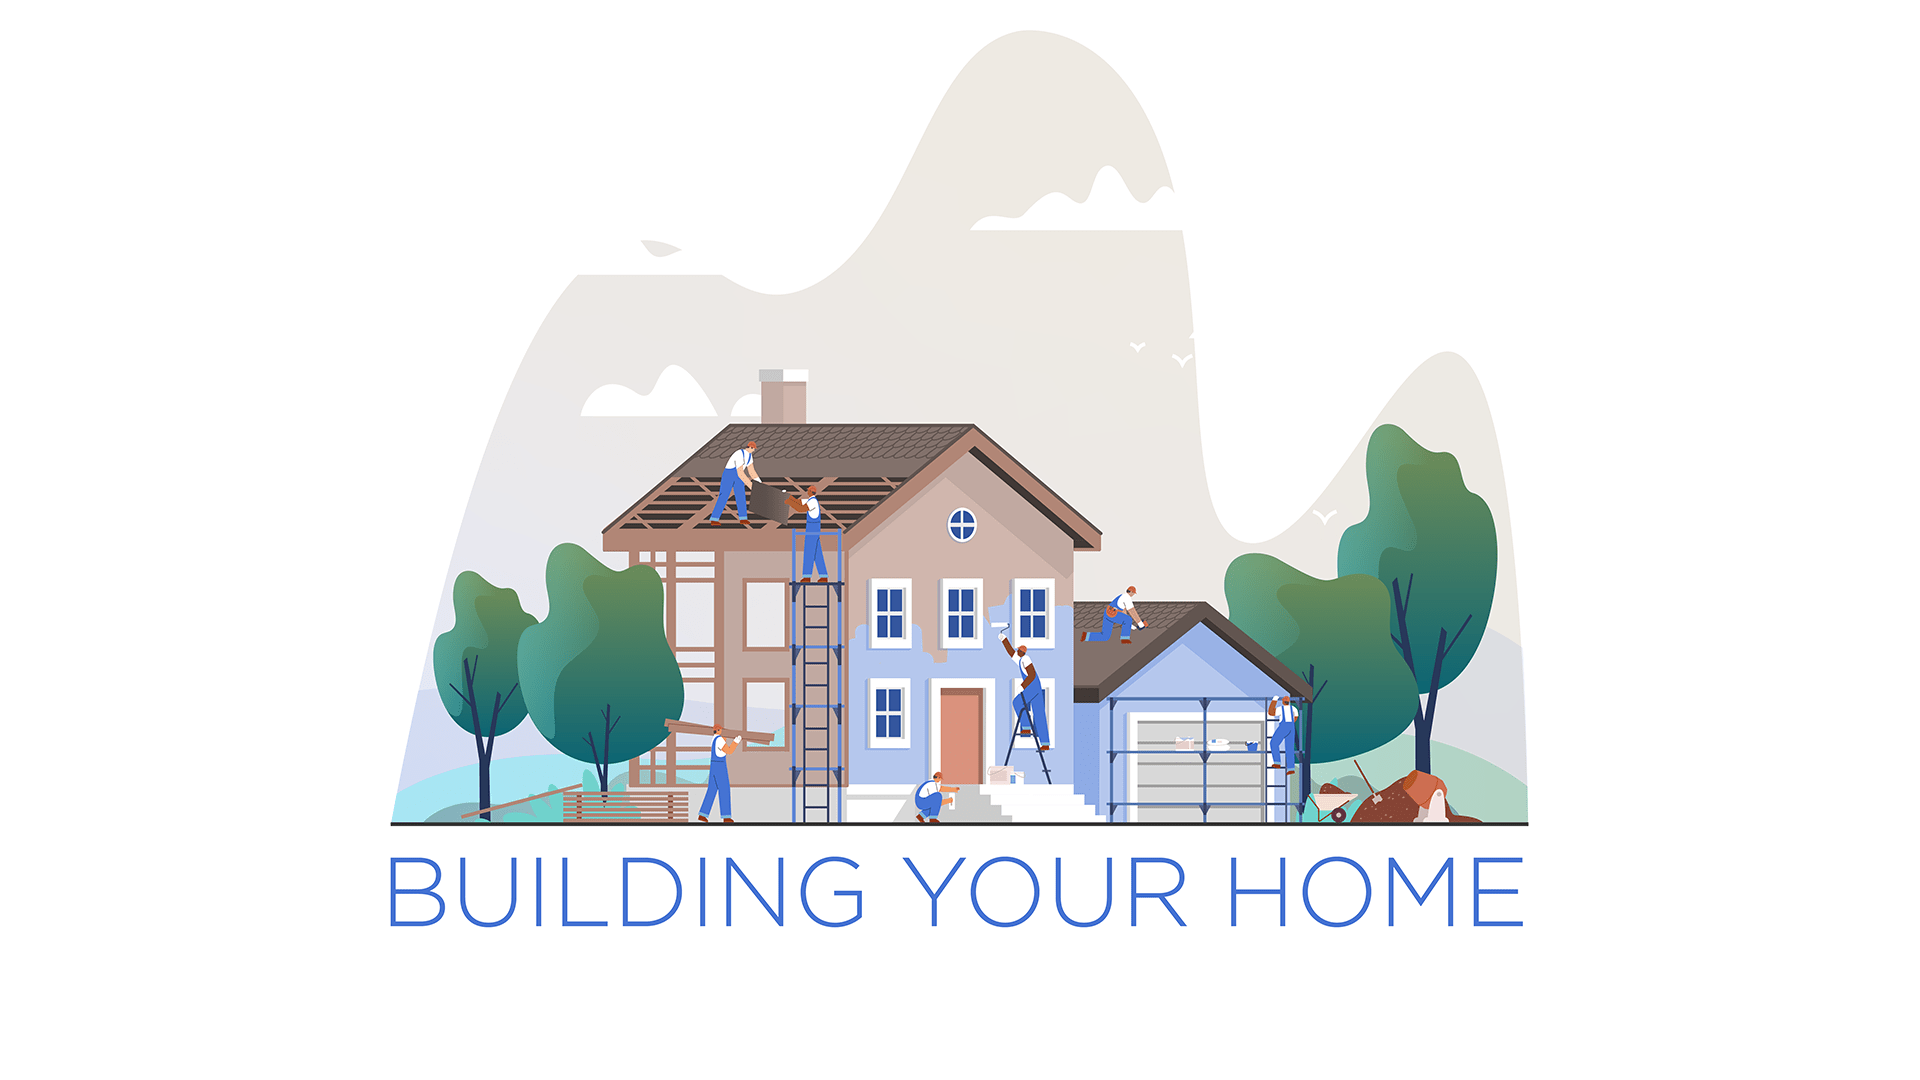 Building Your Home